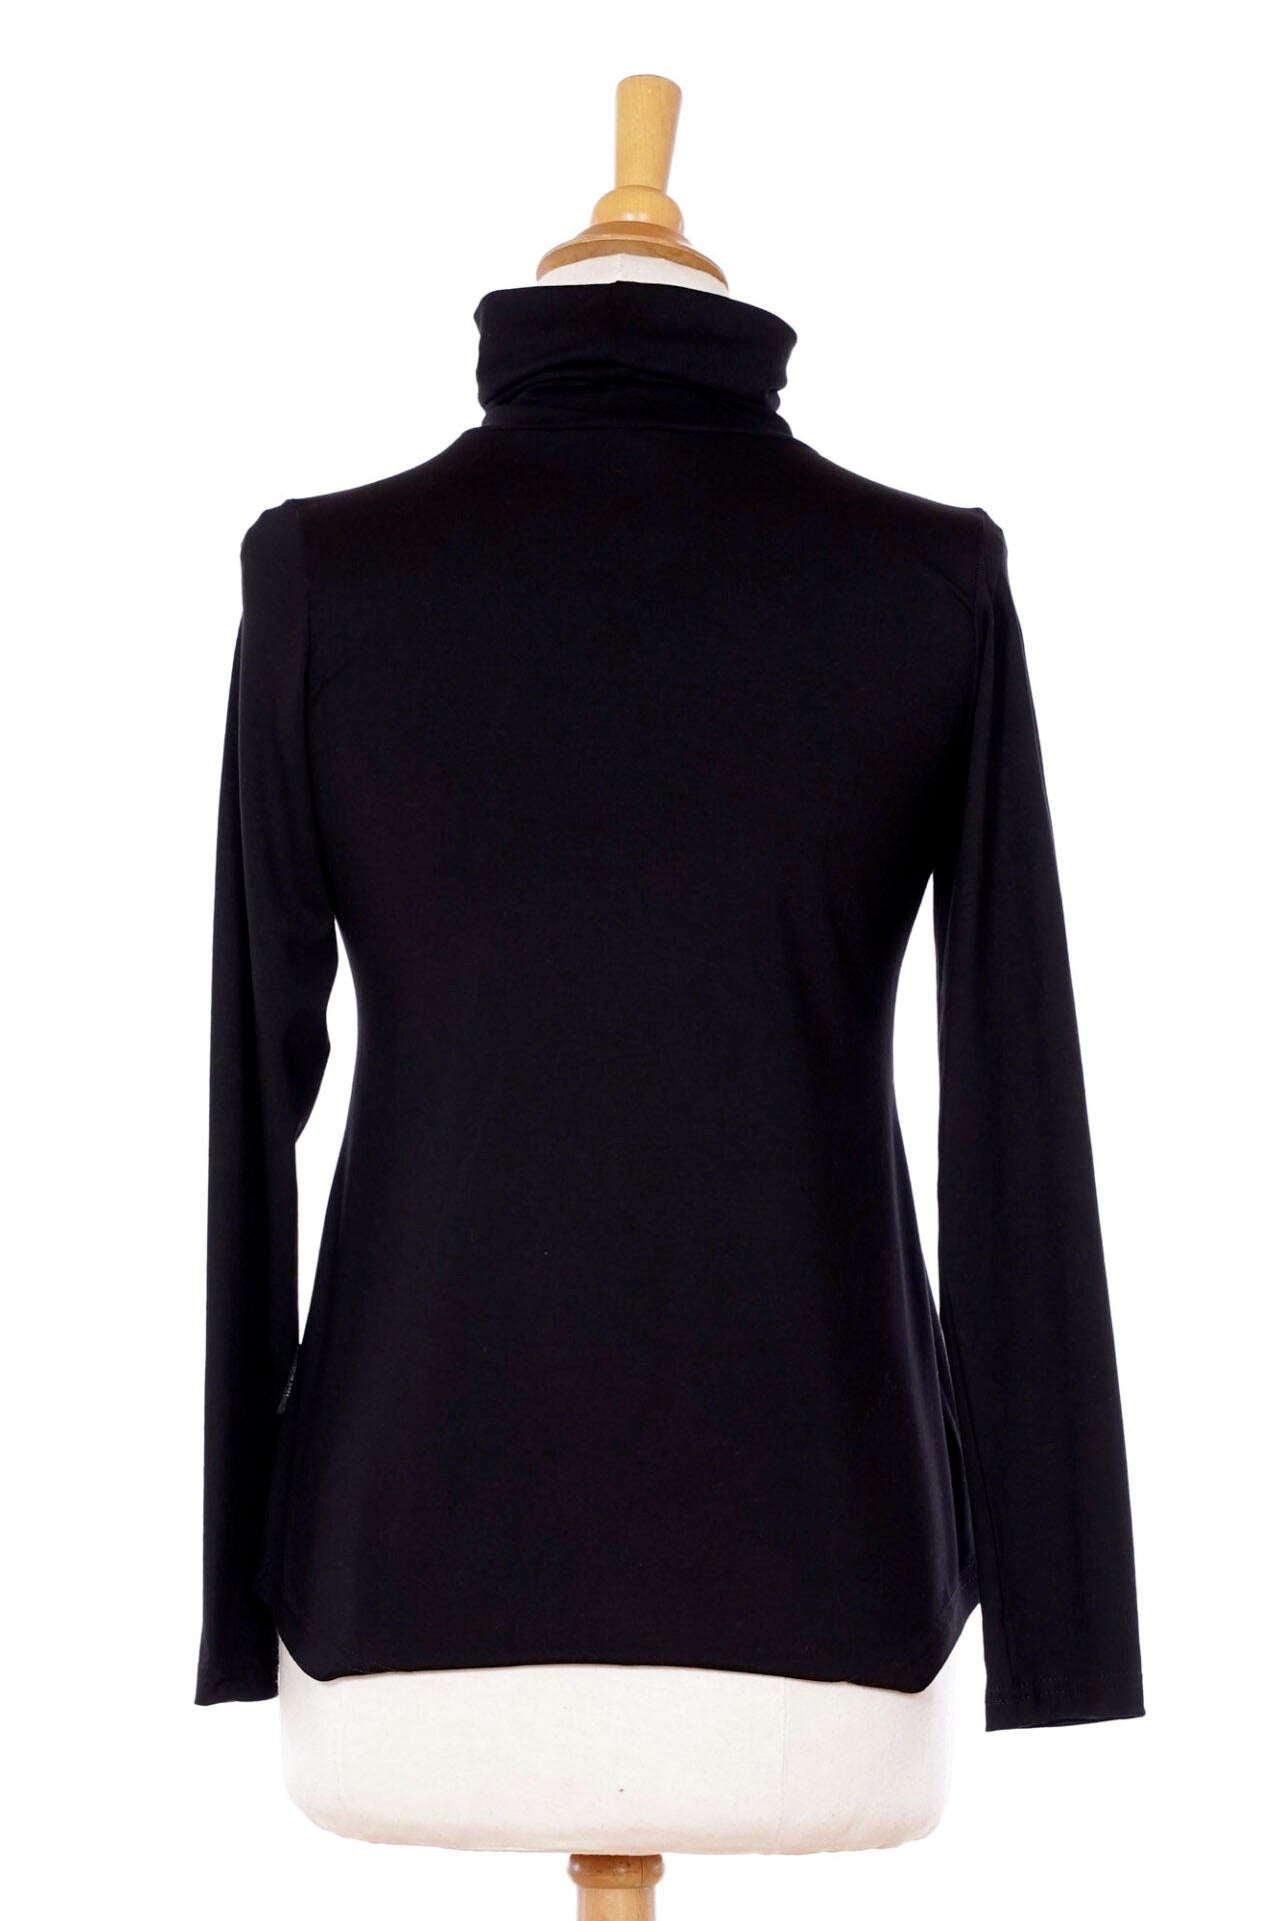 Iris Sweater by Rien ne se Perd, Black, back view, turtleneck, rounded hem, sizes XS to XXL, made in Quebec